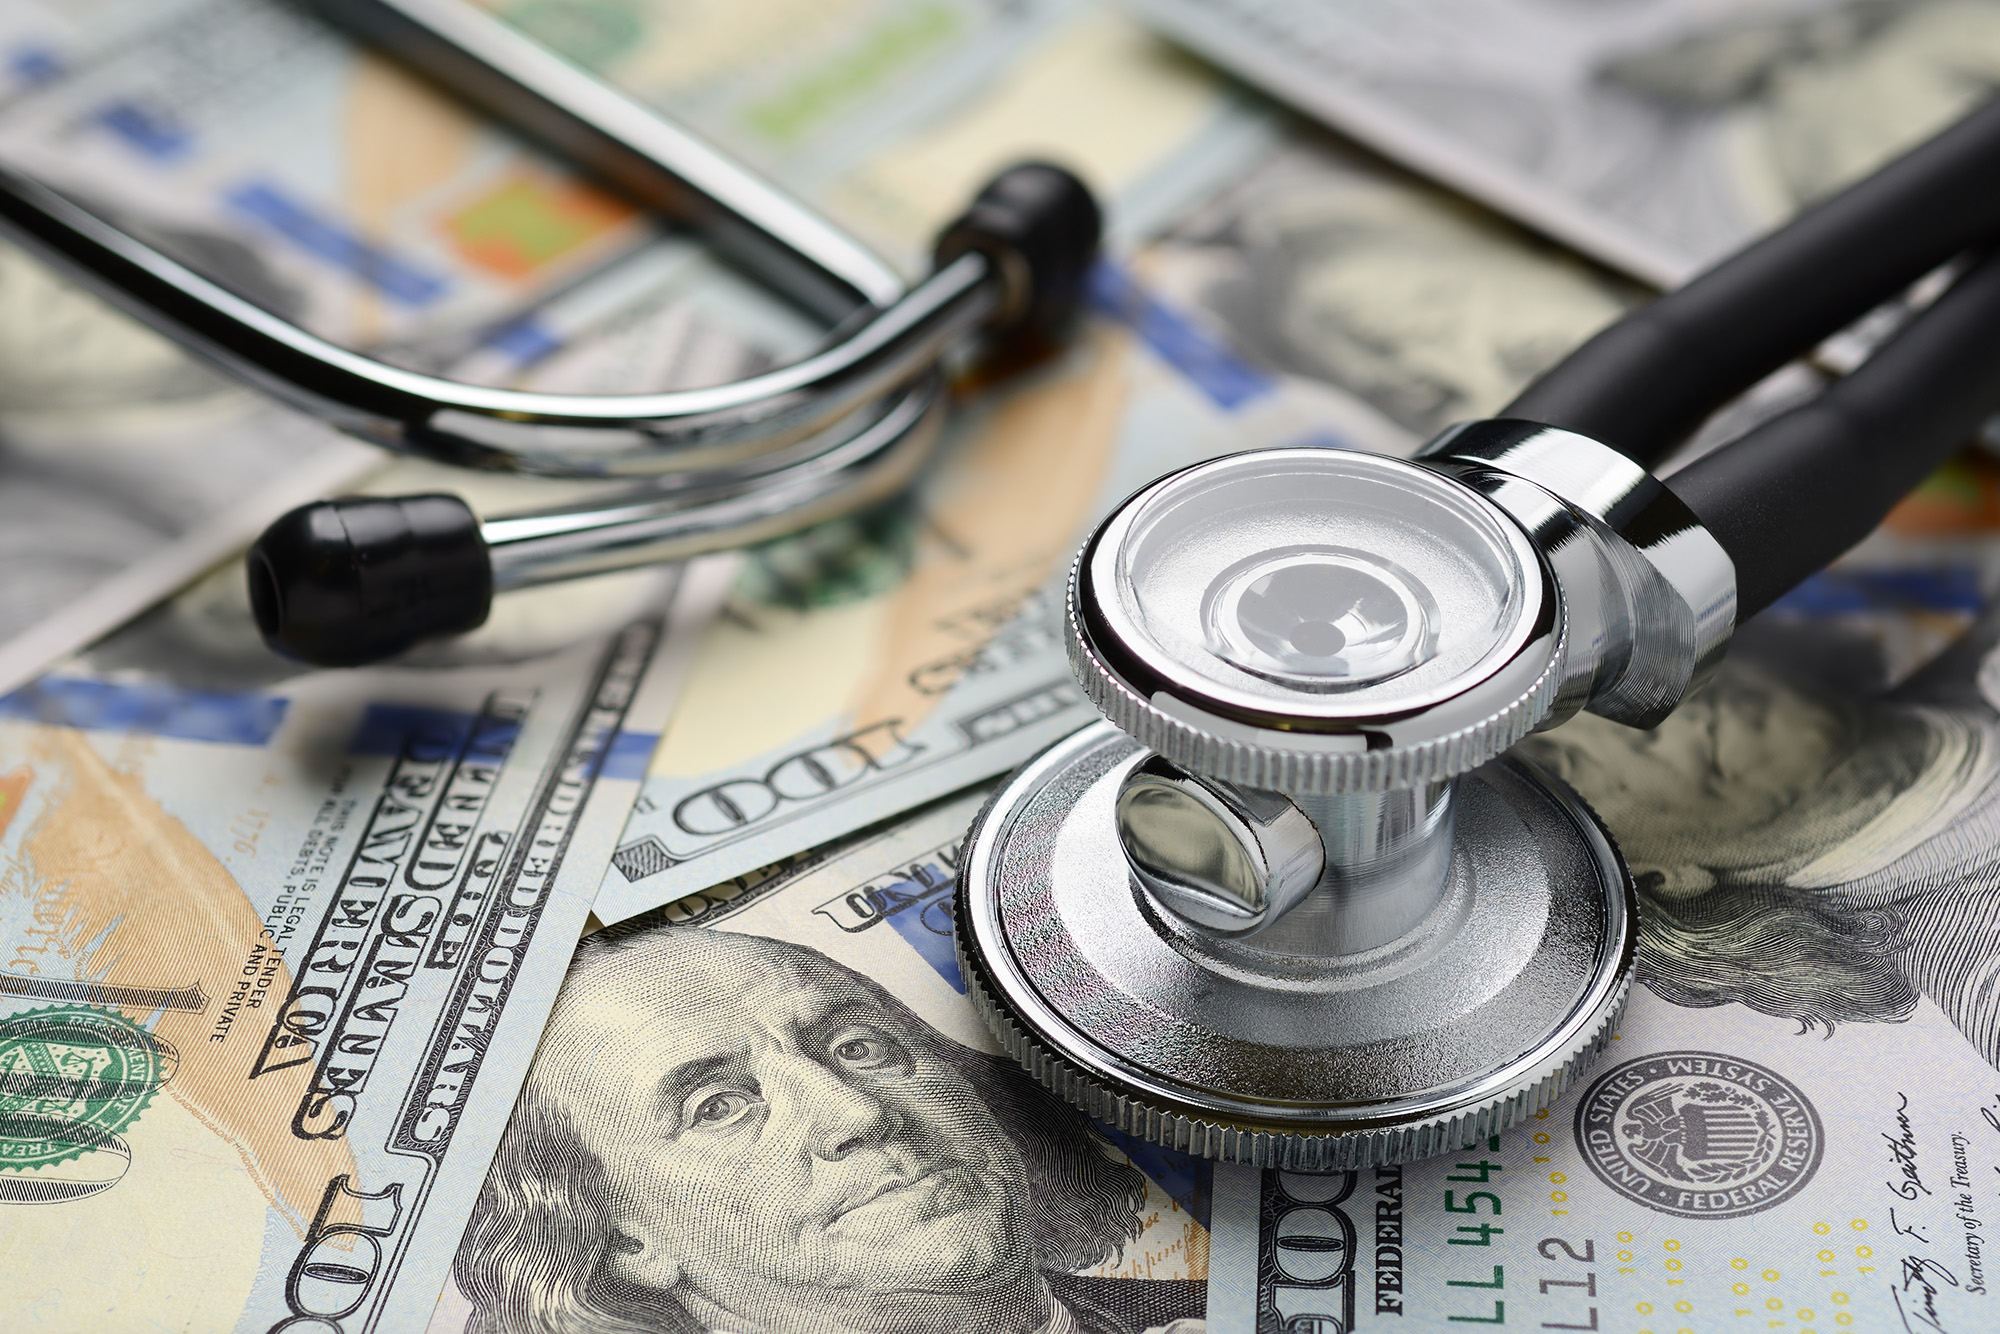 Average Data Breach Cost Hits All-time High of $4.4M: Medical stethoscope on heap of dollar bills. Health care or insurance costs concept. Finance banking audit analytics.